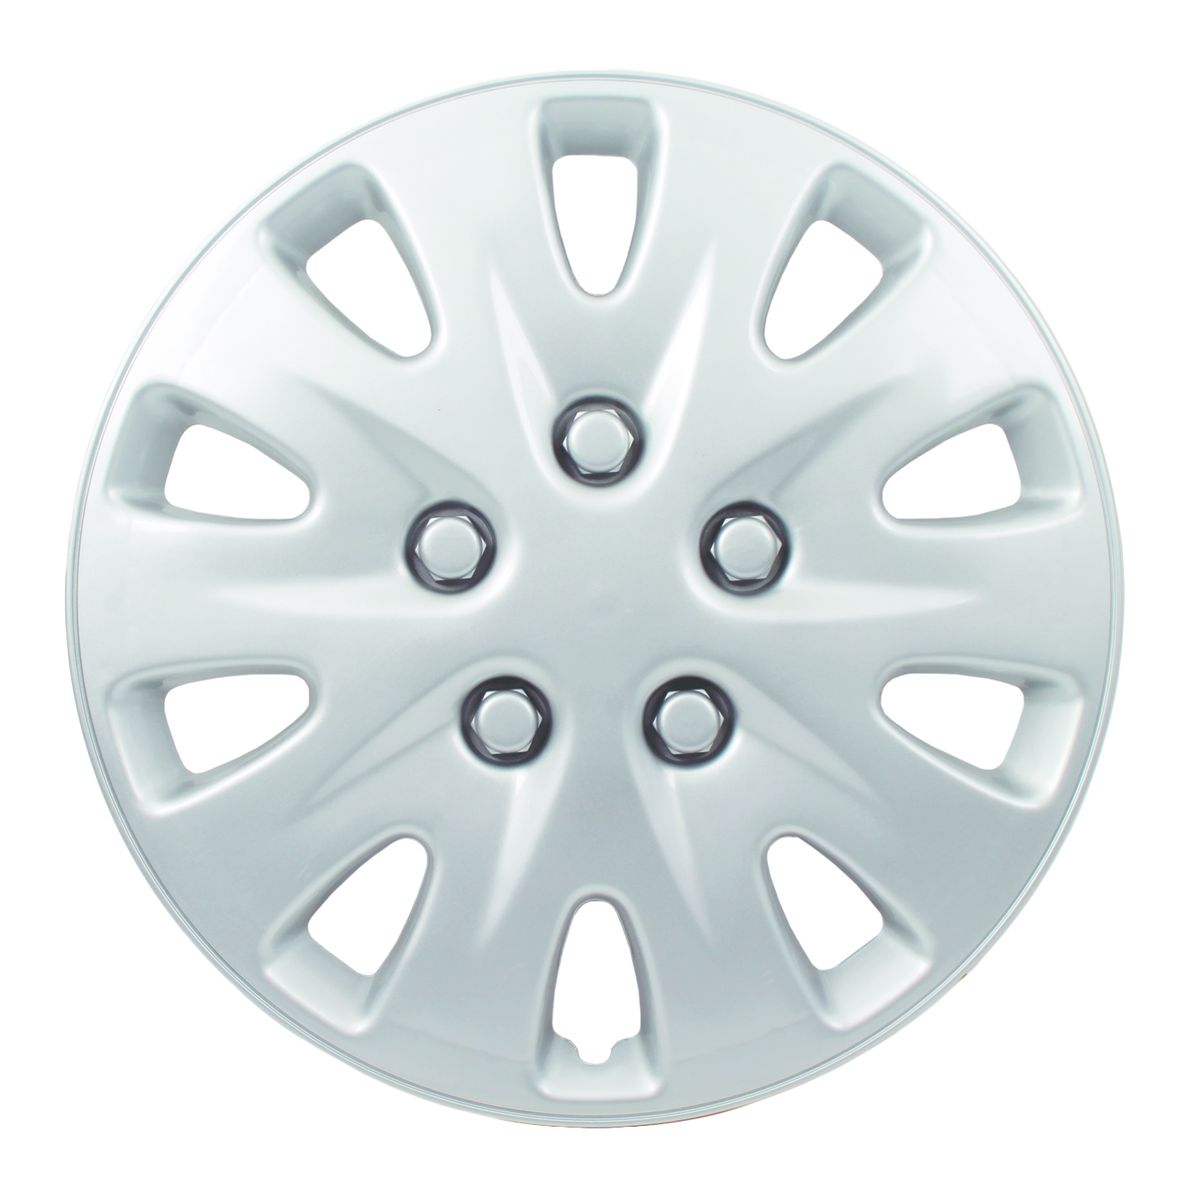 16 Inch Silver Wheel Cover Set  Shop Today. Get it Tomorrow